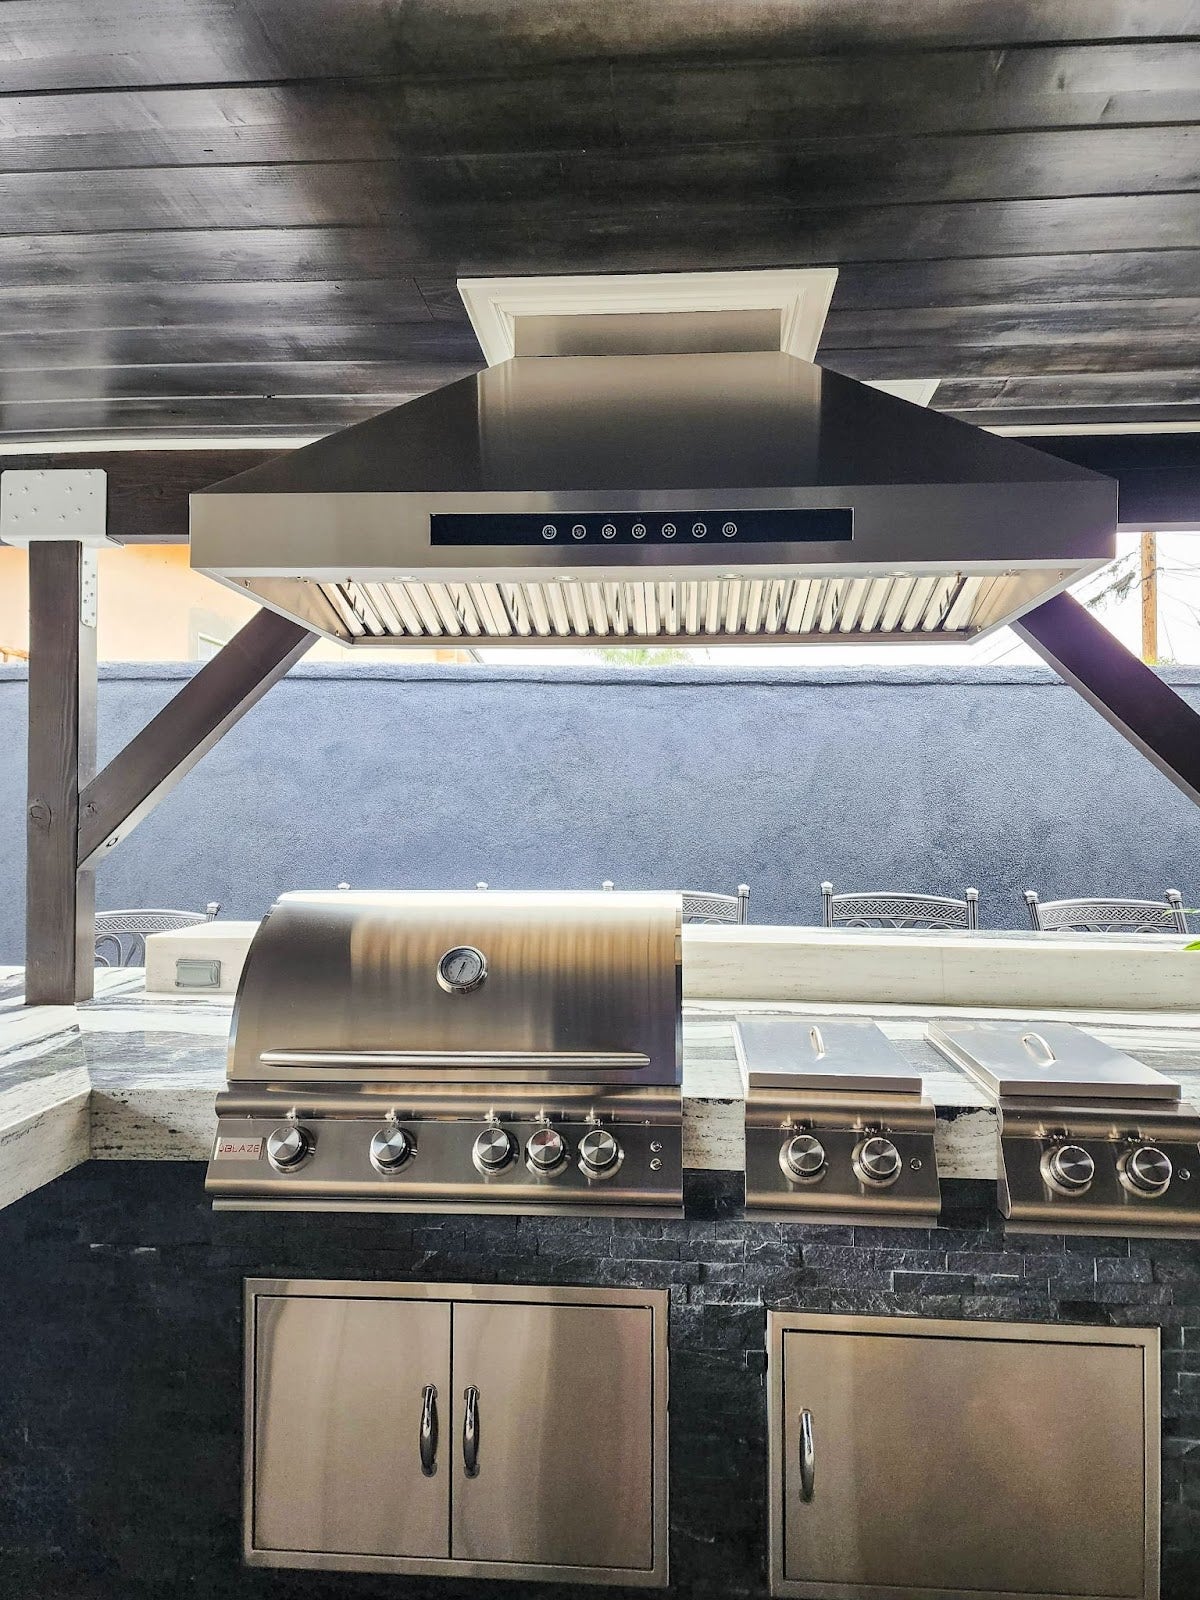 Contemporary outdoor kitchen with a stainless steel BBQ grill and extractor hood, set against a dark stone wall under a stained wooden ceiling.